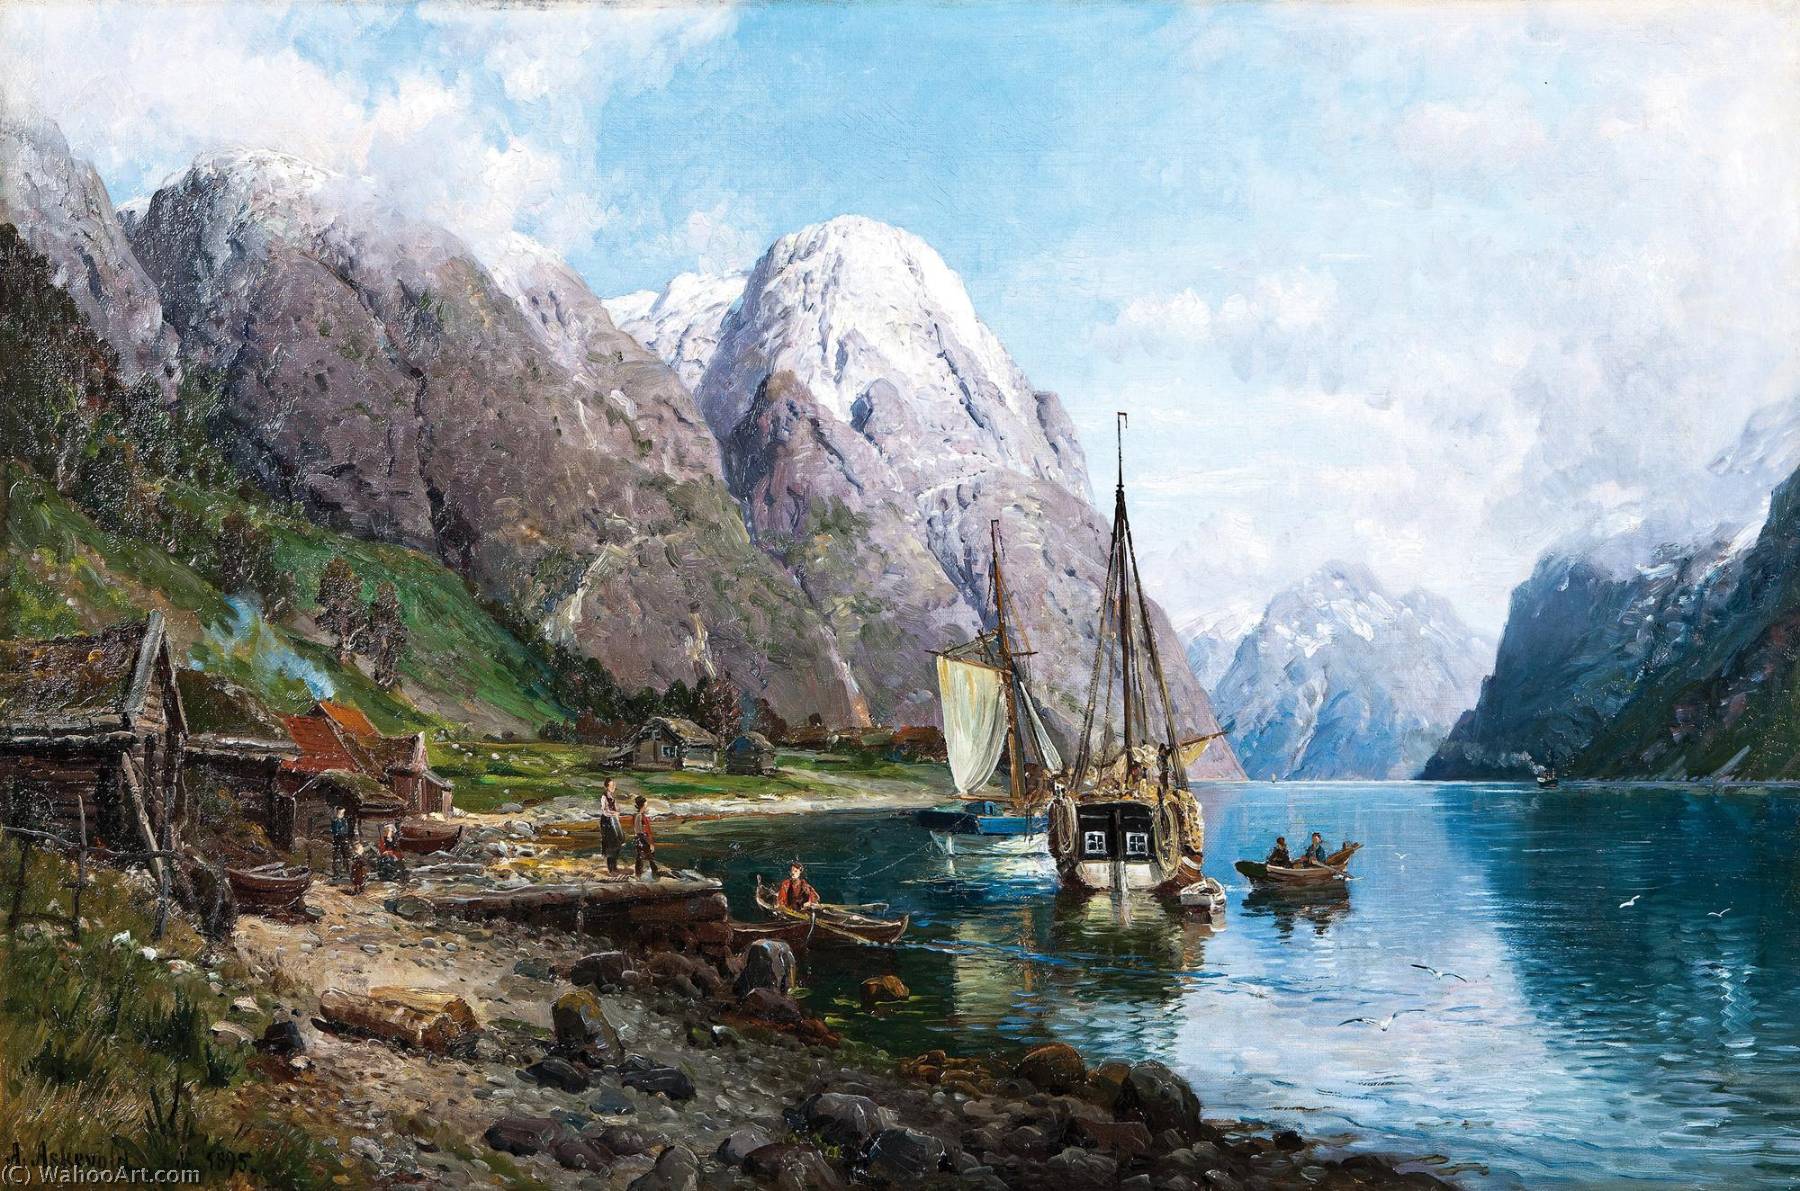 WikiOO.org - دایره المعارف هنرهای زیبا - نقاشی، آثار هنری Anders Monsen Askevold - Harbor in the Sognefjord (also known as From a Harbor in the Sognefjord)